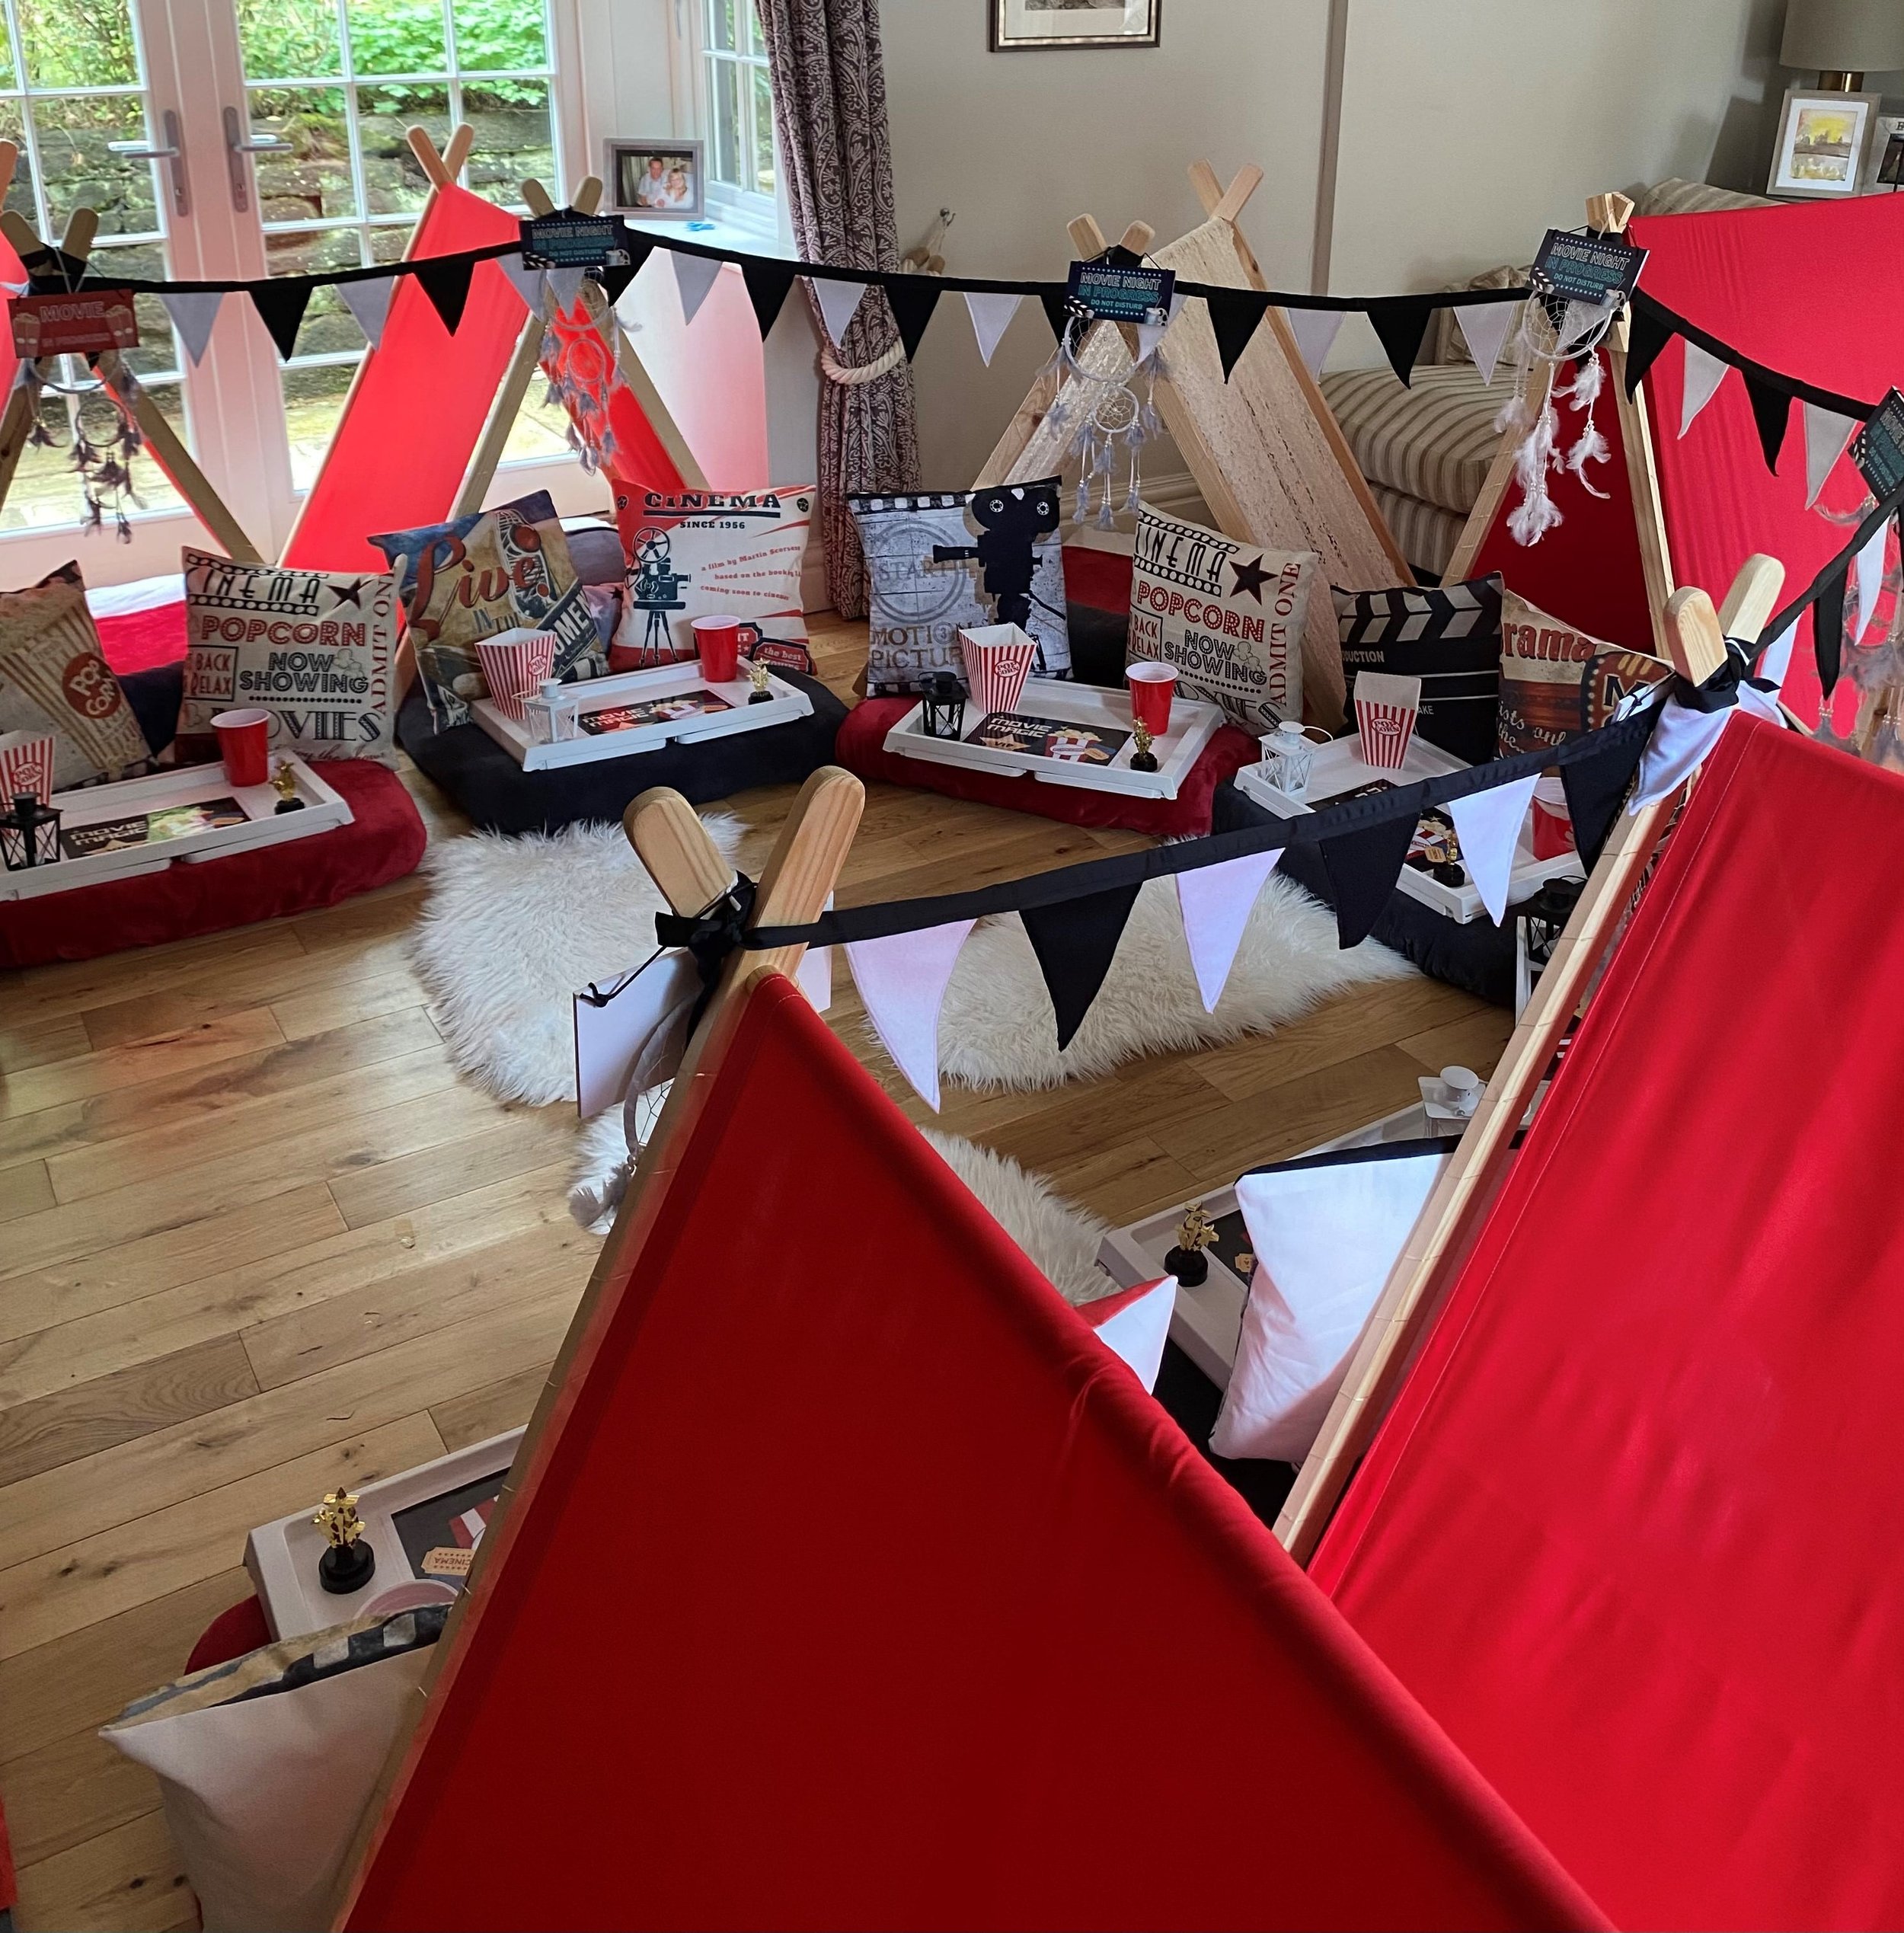 The Little Sleepy Teepee Party - Sleepover Party Tents in Staffordshire